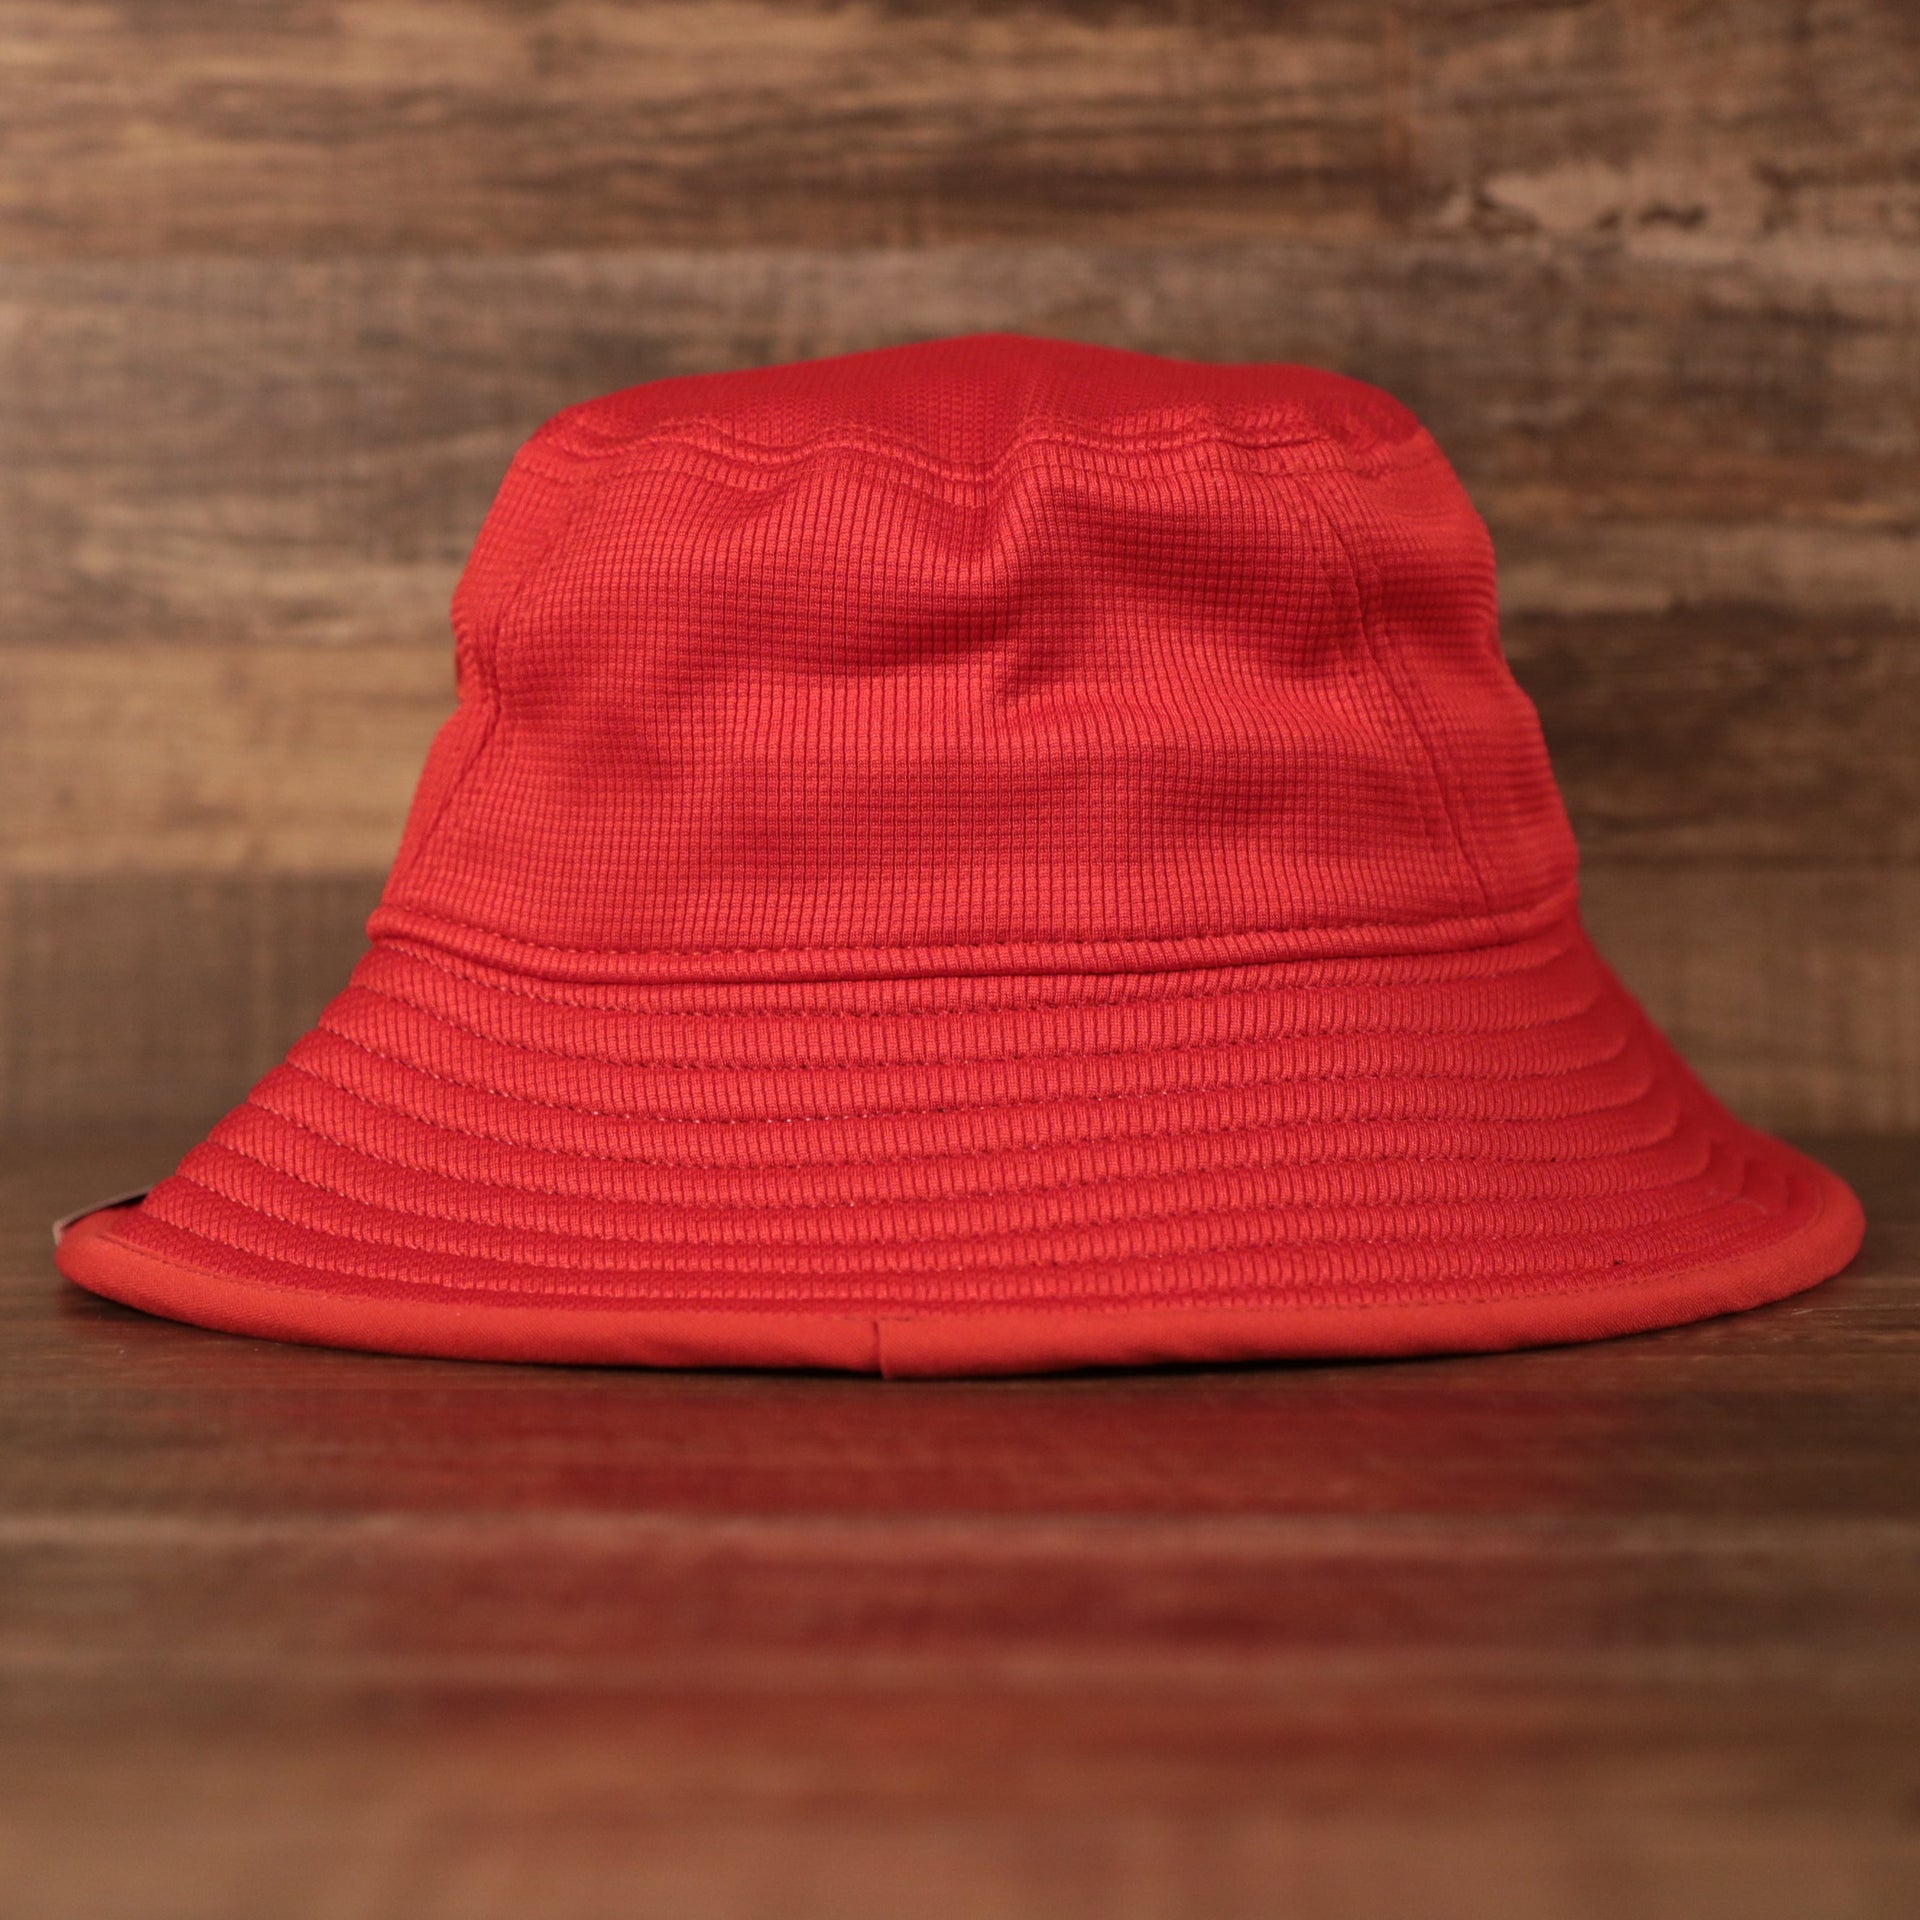 The brim of the red Houston Rockets bucket hat.